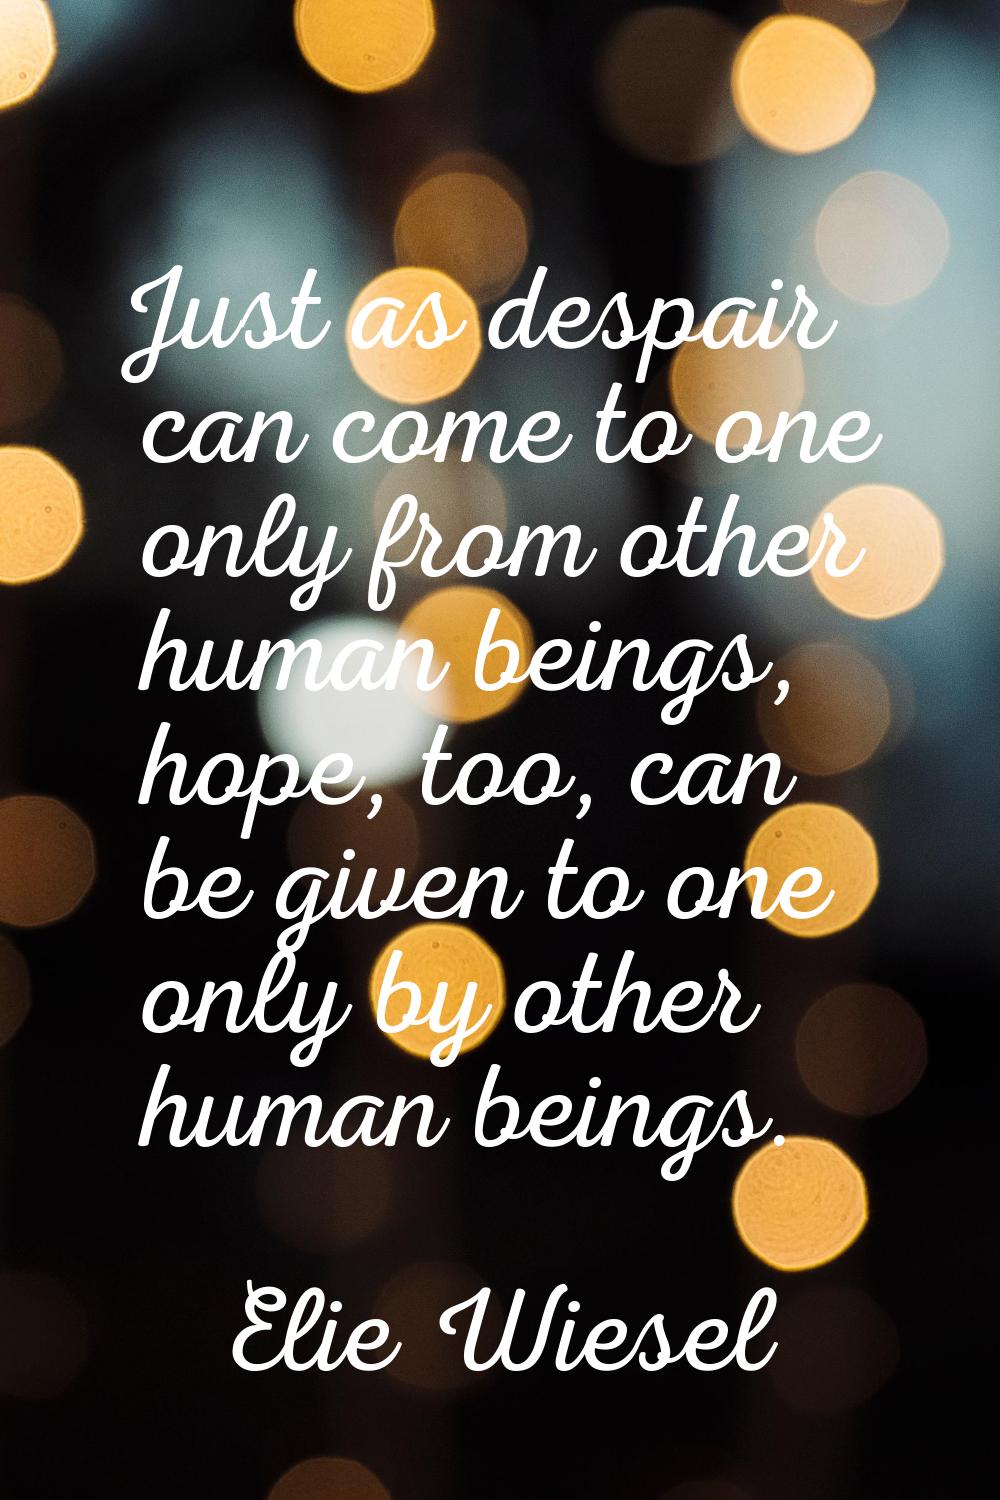 Just as despair can come to one only from other human beings, hope, too, can be given to one only b